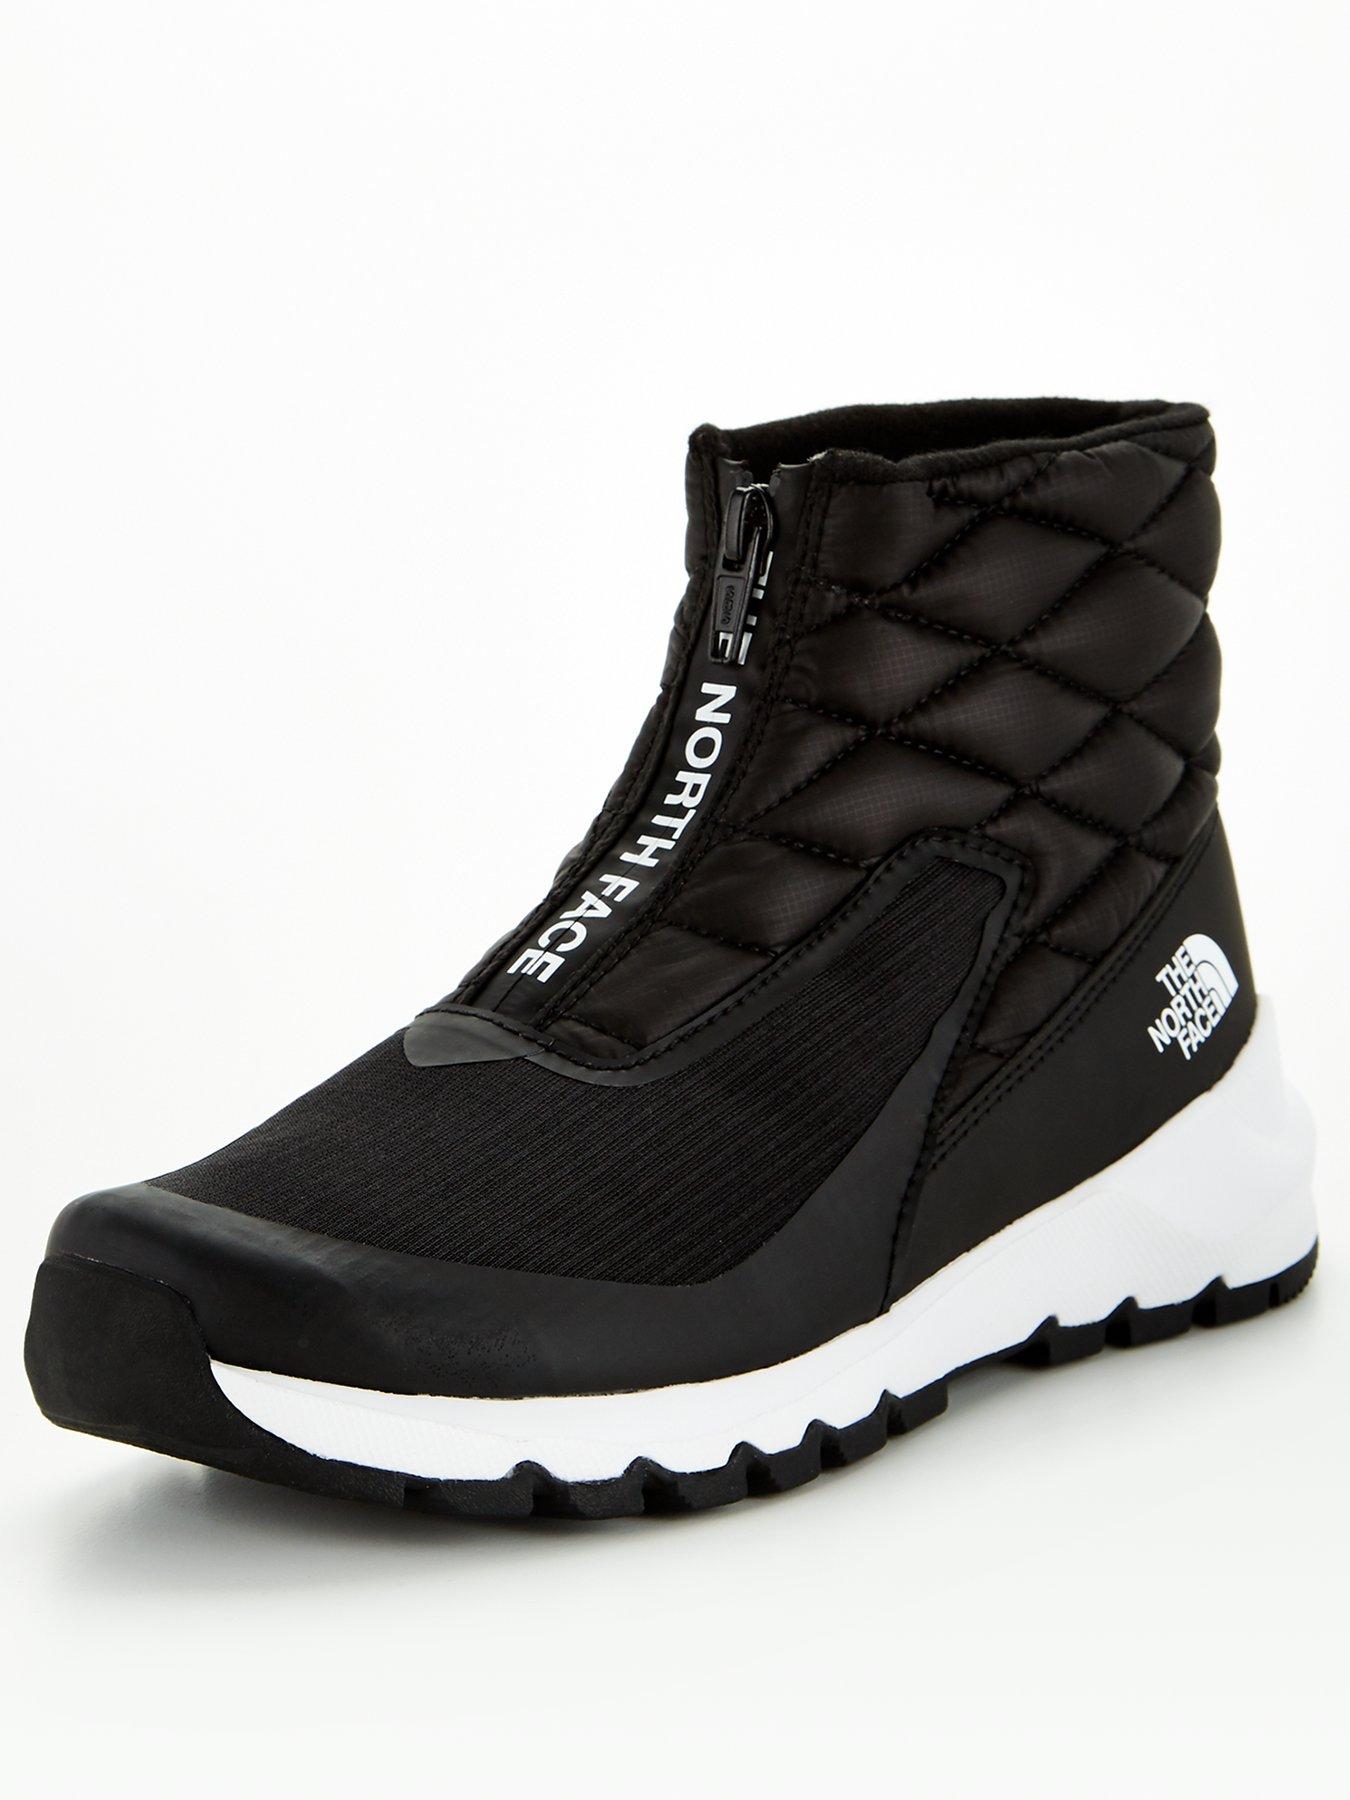 north face trainer boots